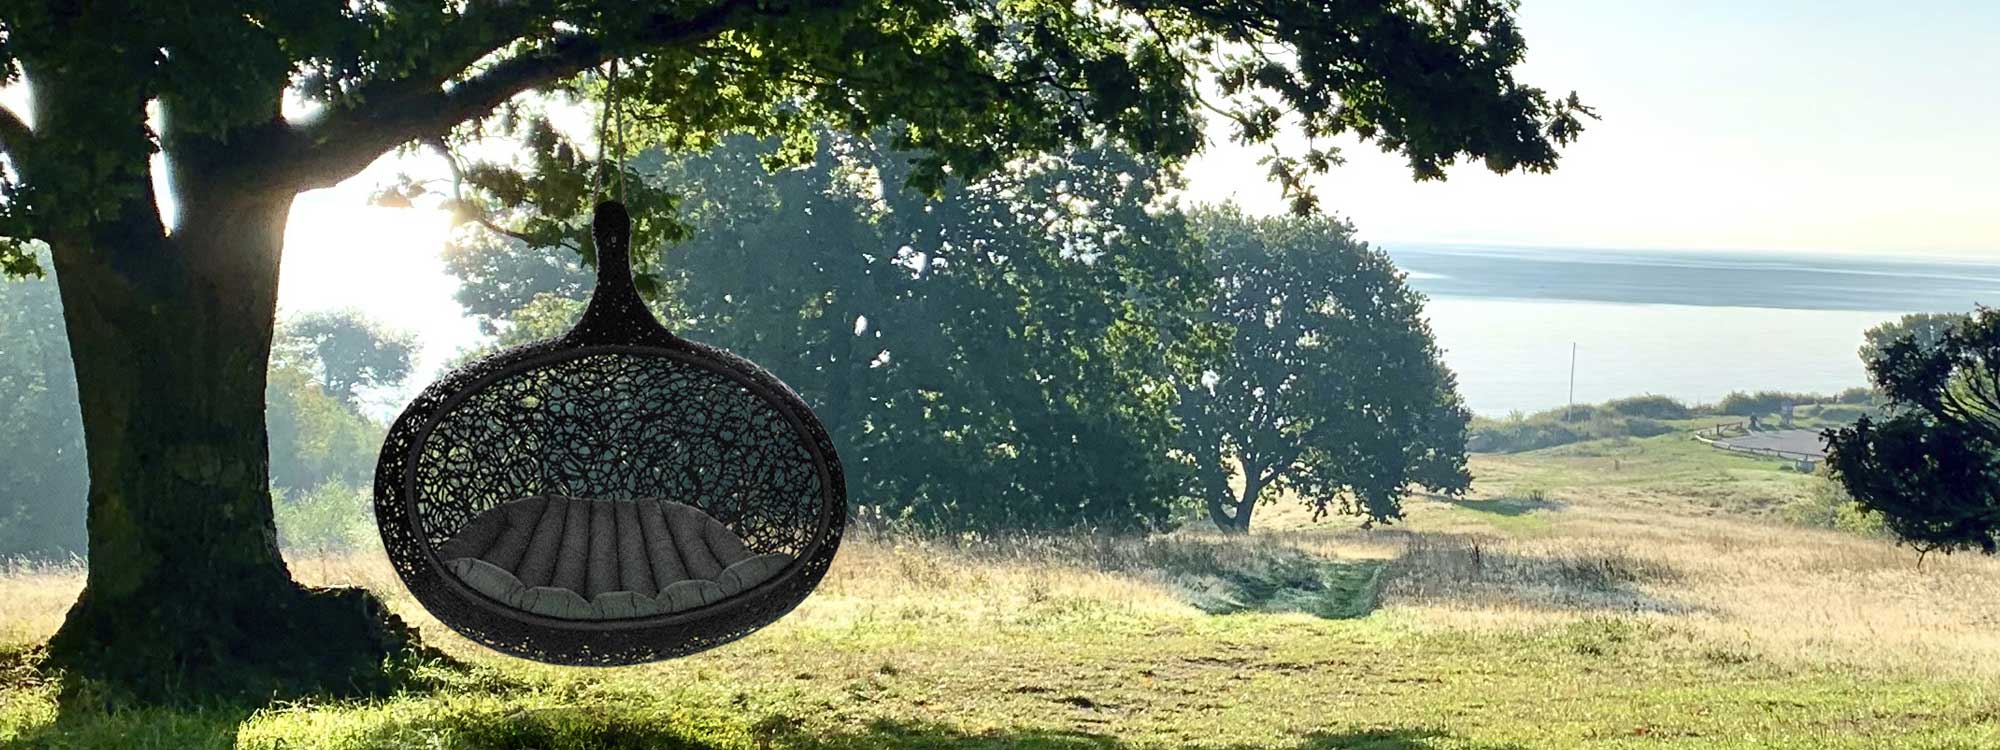 Image of Bios Hide garden swing seat with Danish countryside in background